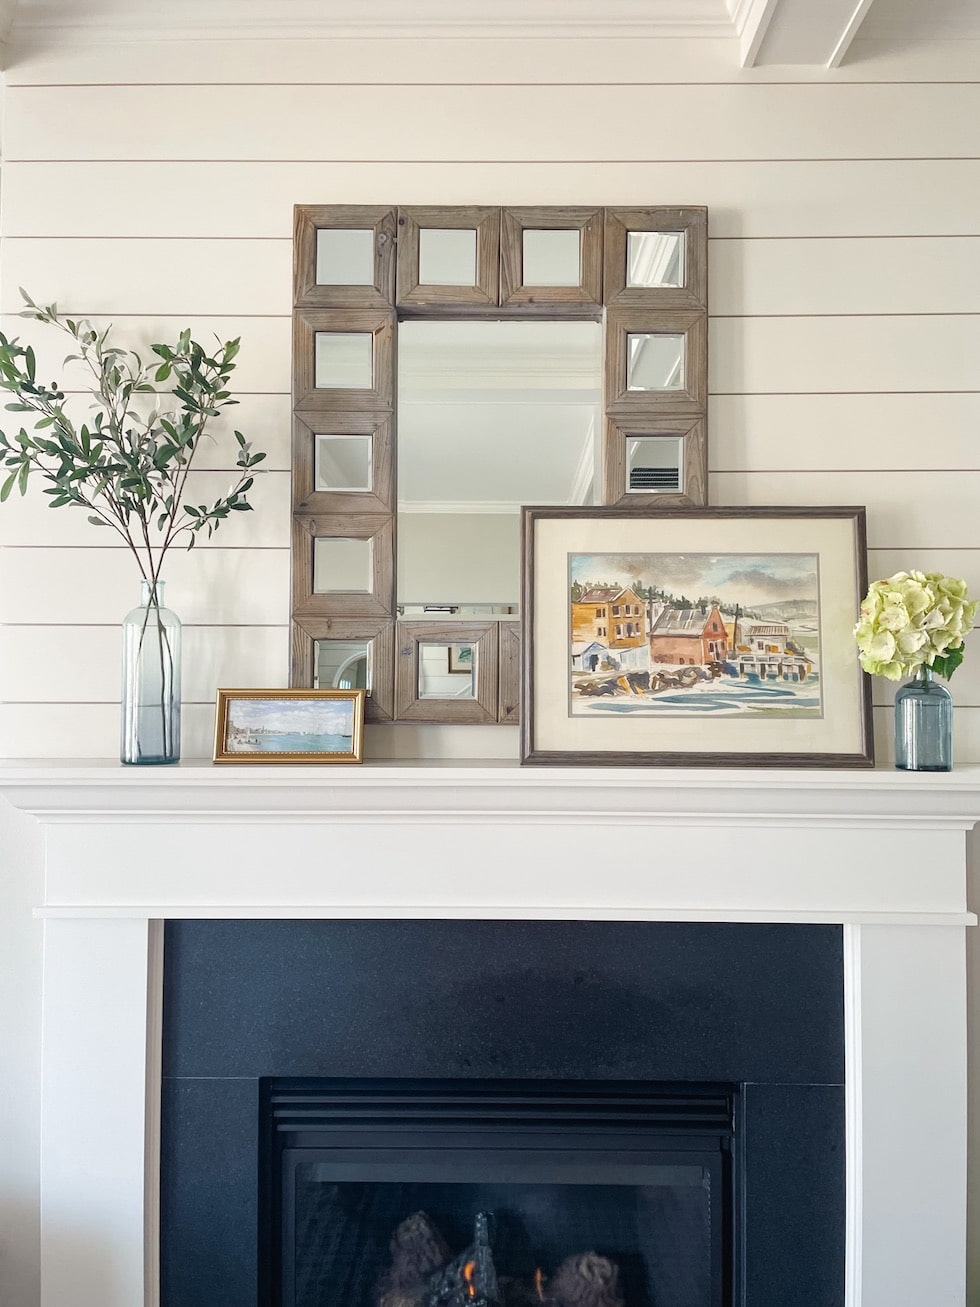 How to Decorate a Fall Mantel (Using What You Have!)